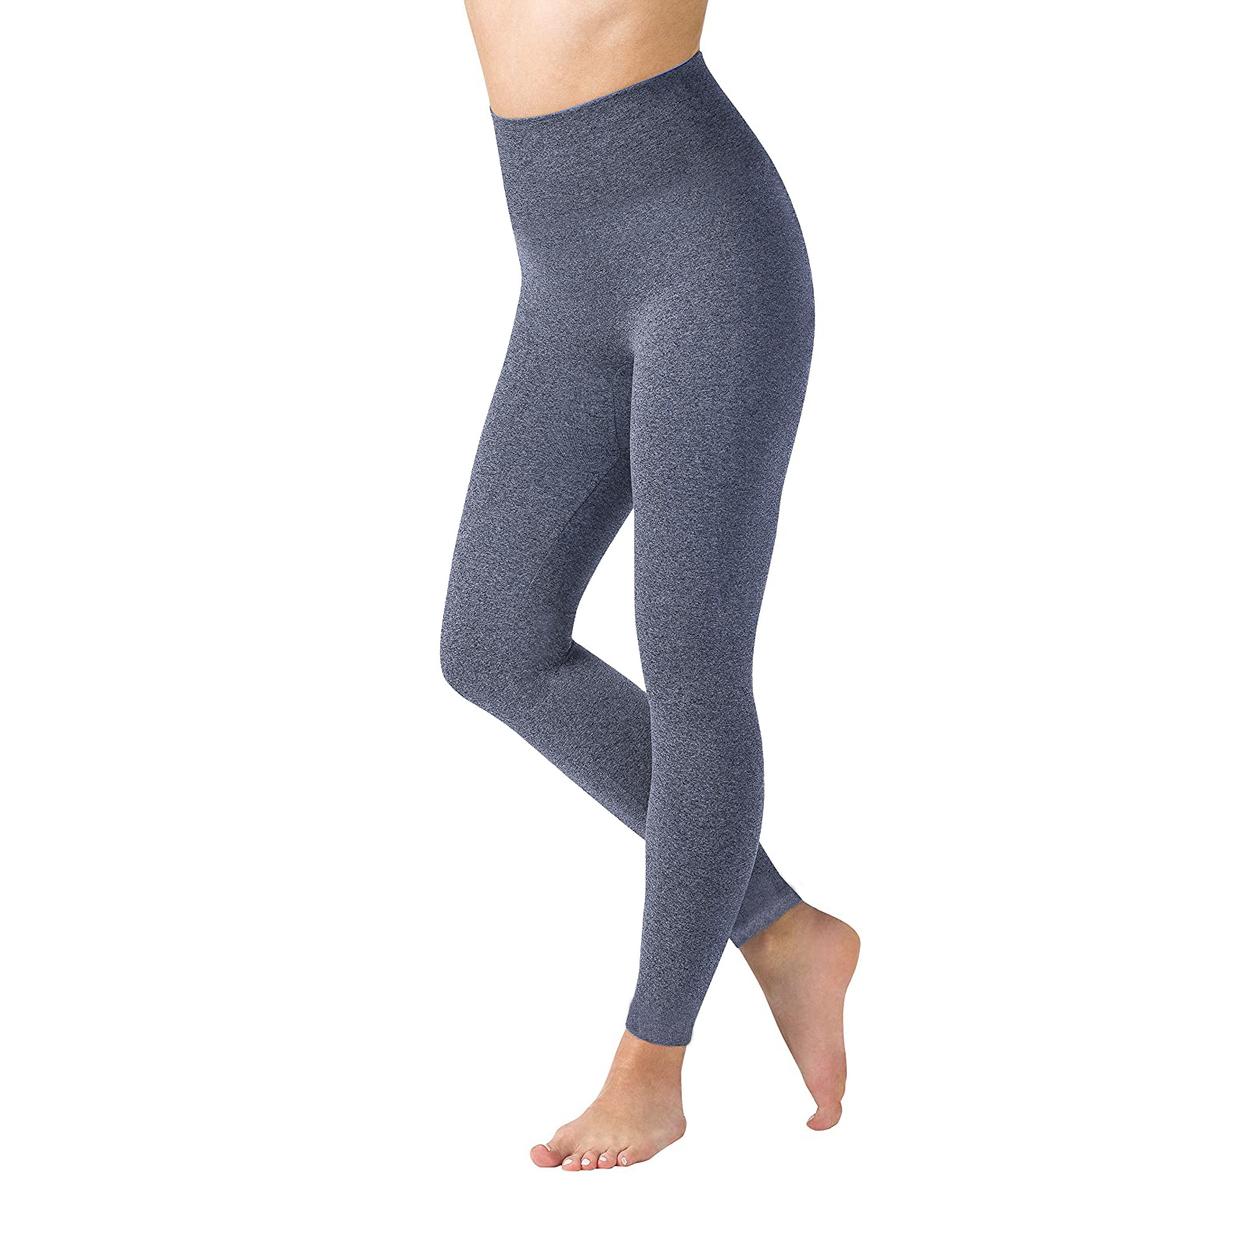 Multi-Pack: Women's High Waisted Ultra-Soft Fleece Lined Warm Marled Leggings(Available In Plus Sizes) - 2-pack, Charcoal & Navy, Large